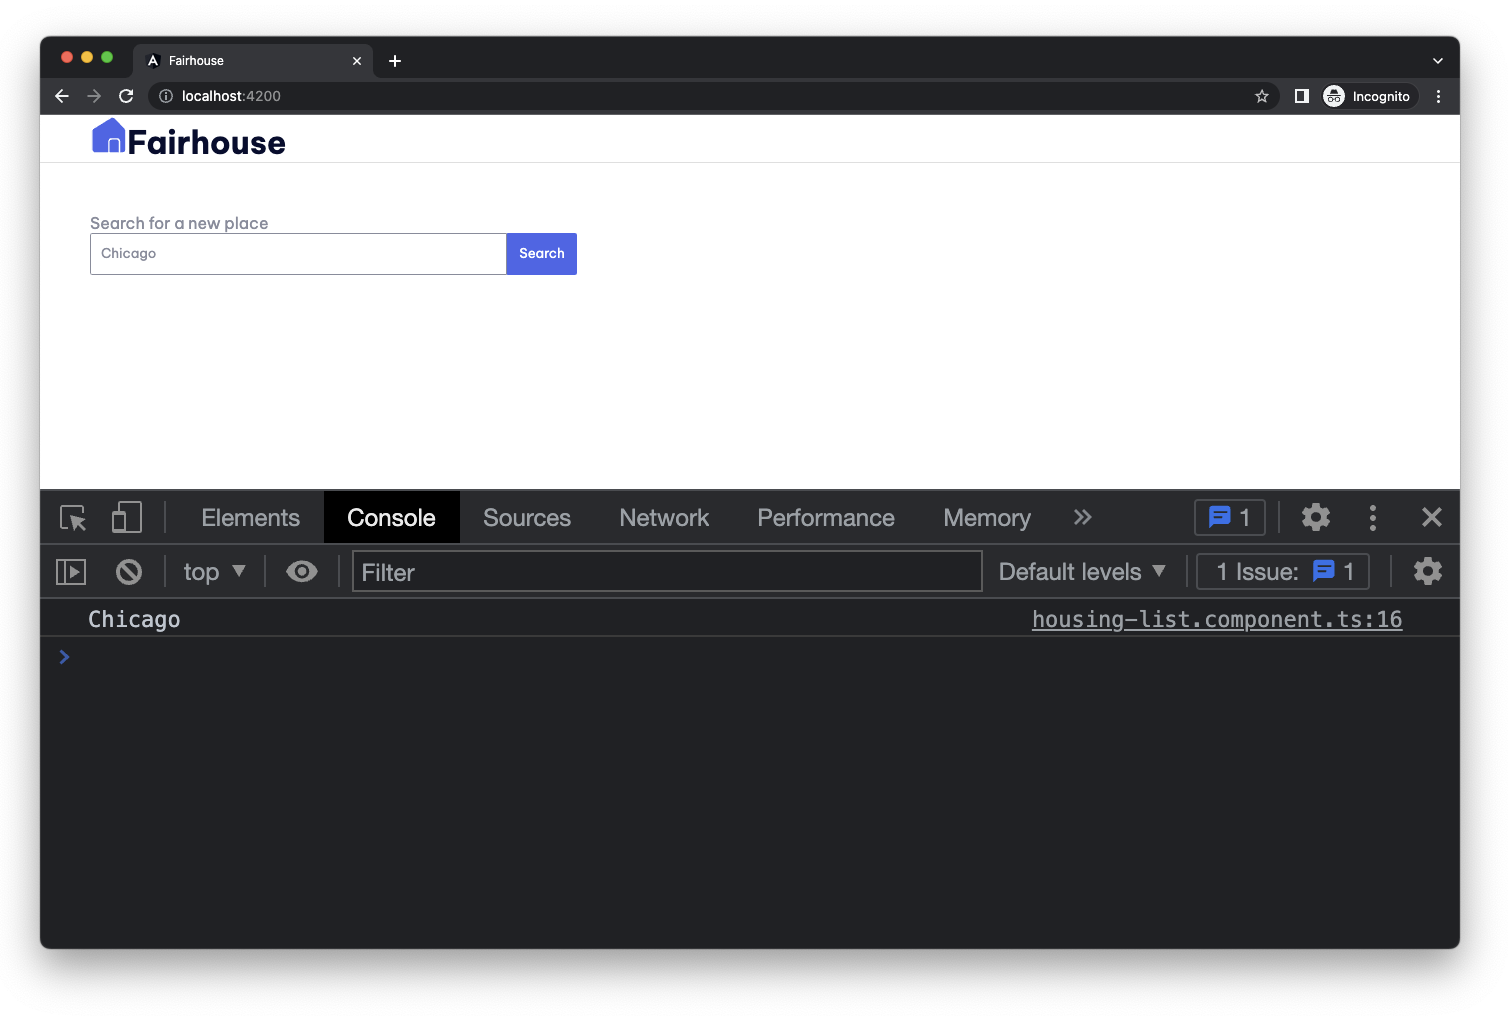 chrome devtools console output matching search text from UI